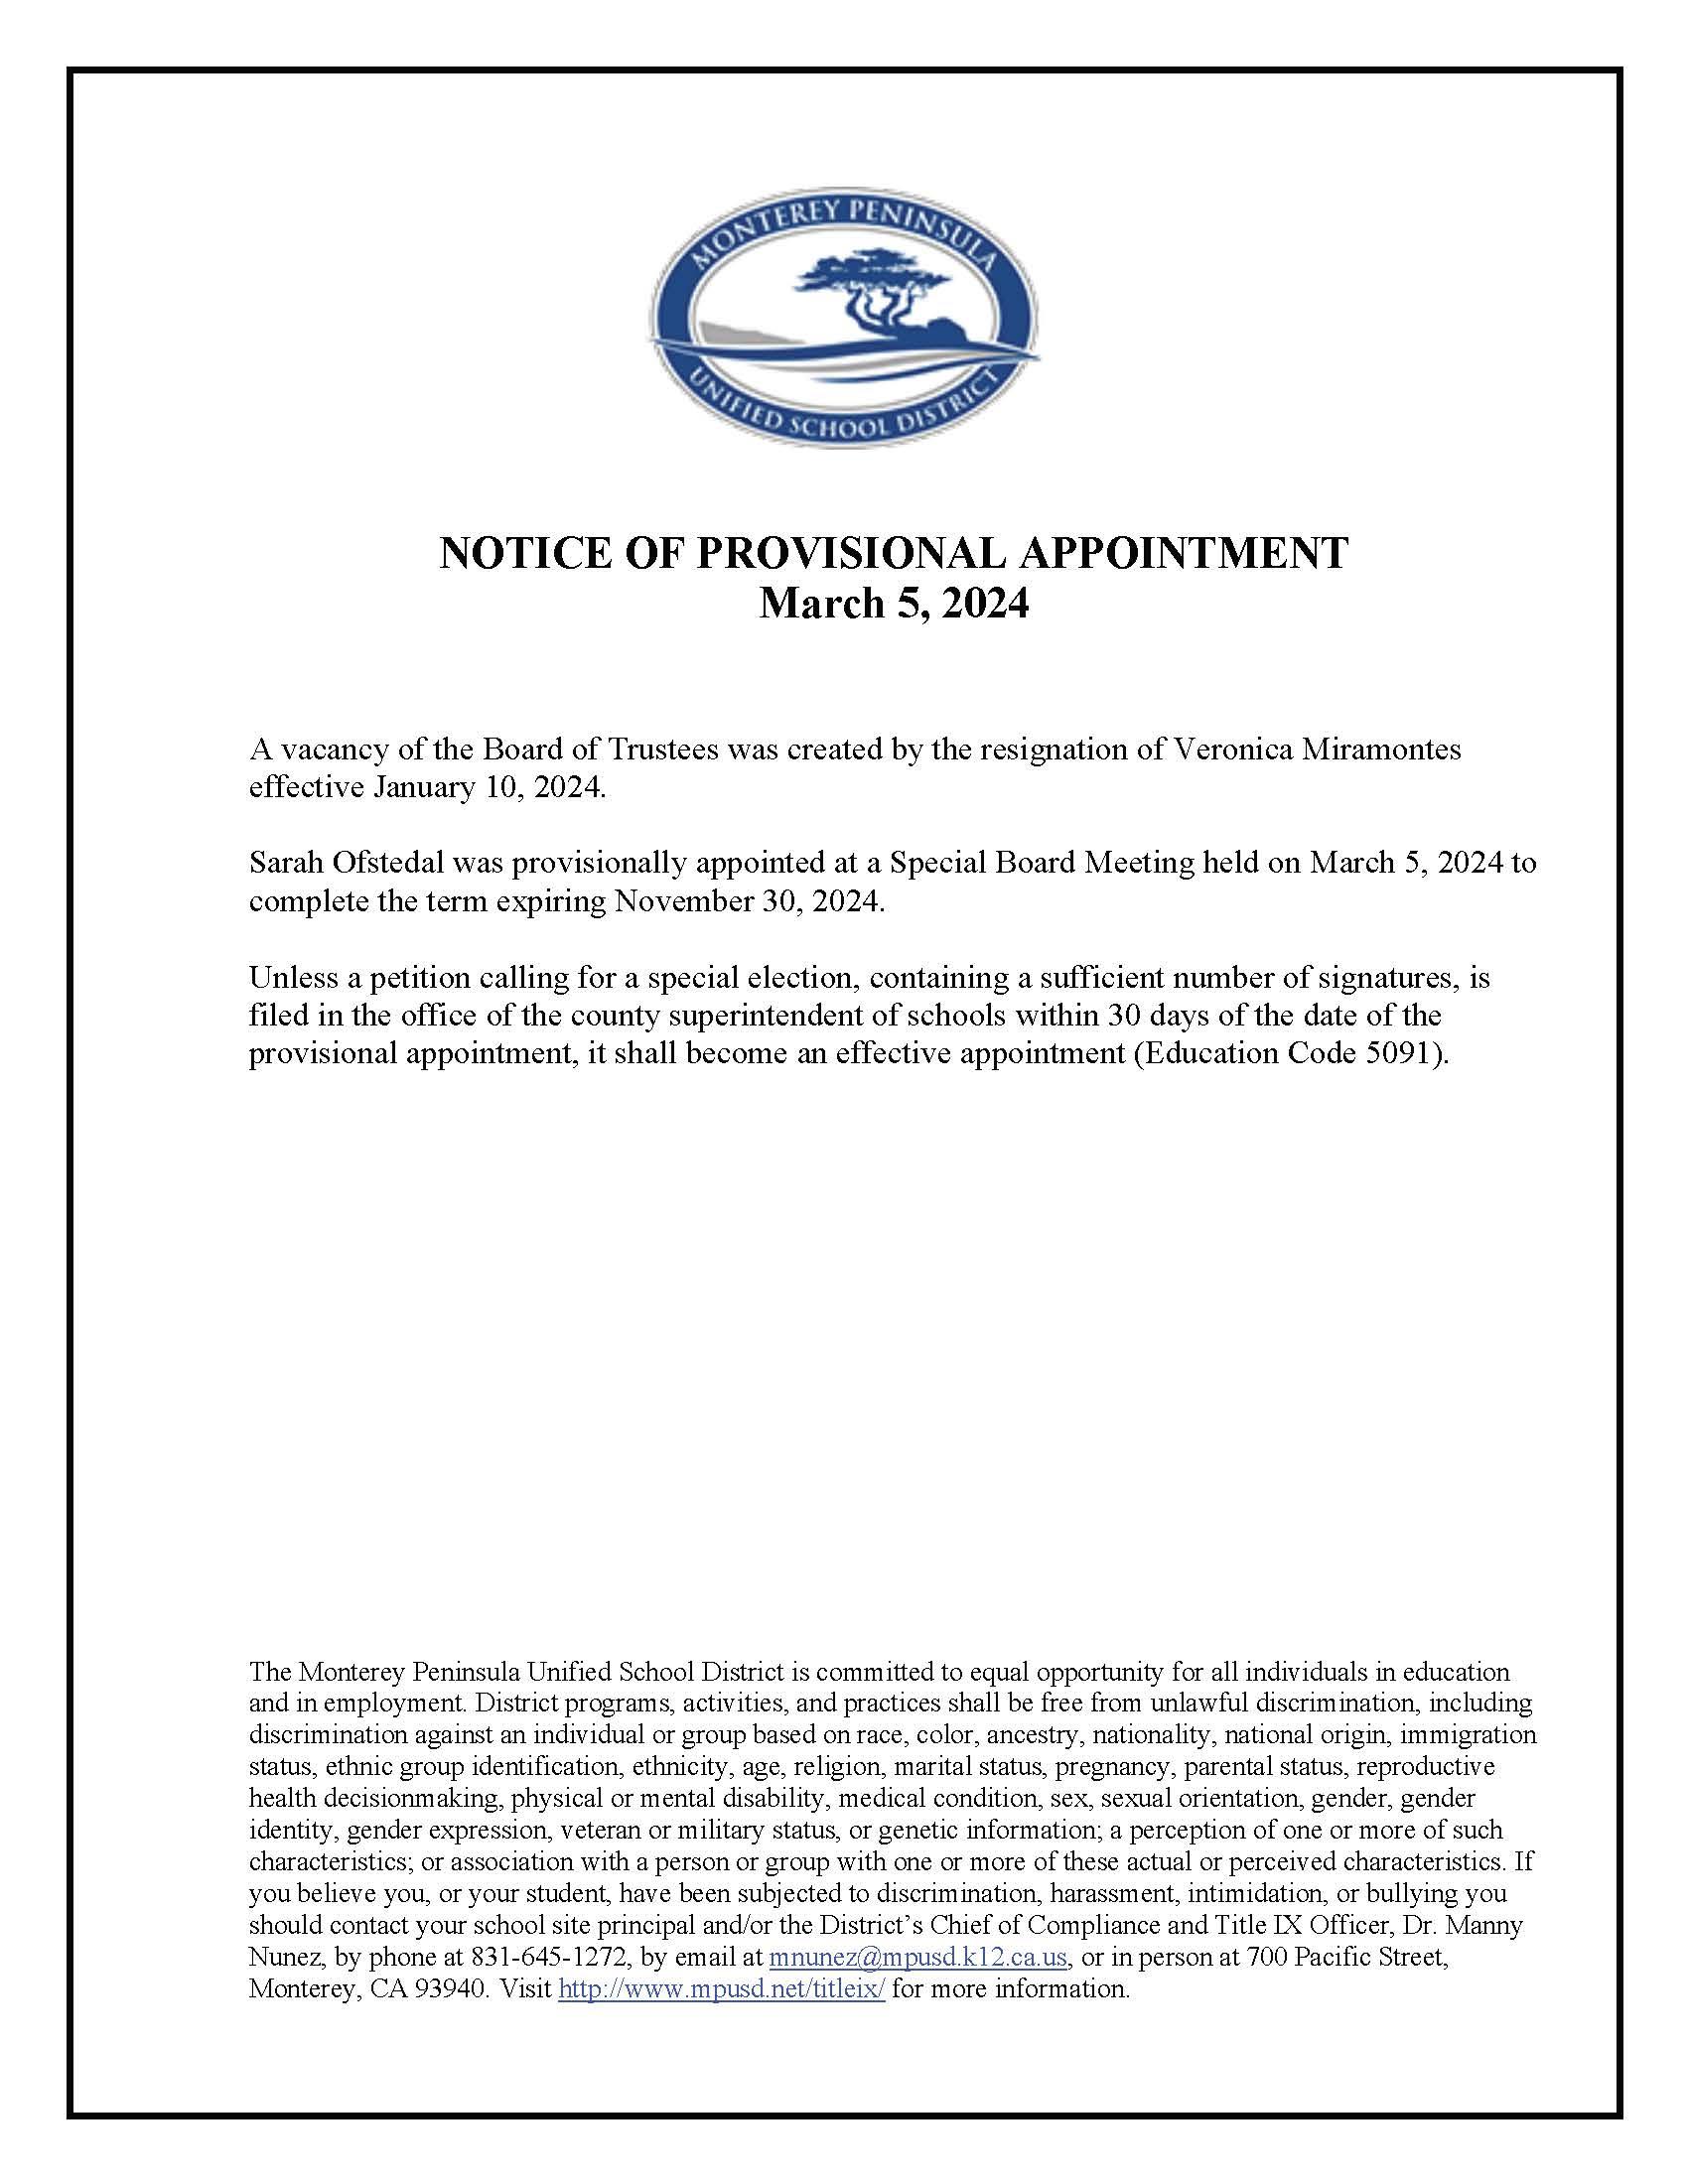 English Notice of Provisional Appointment